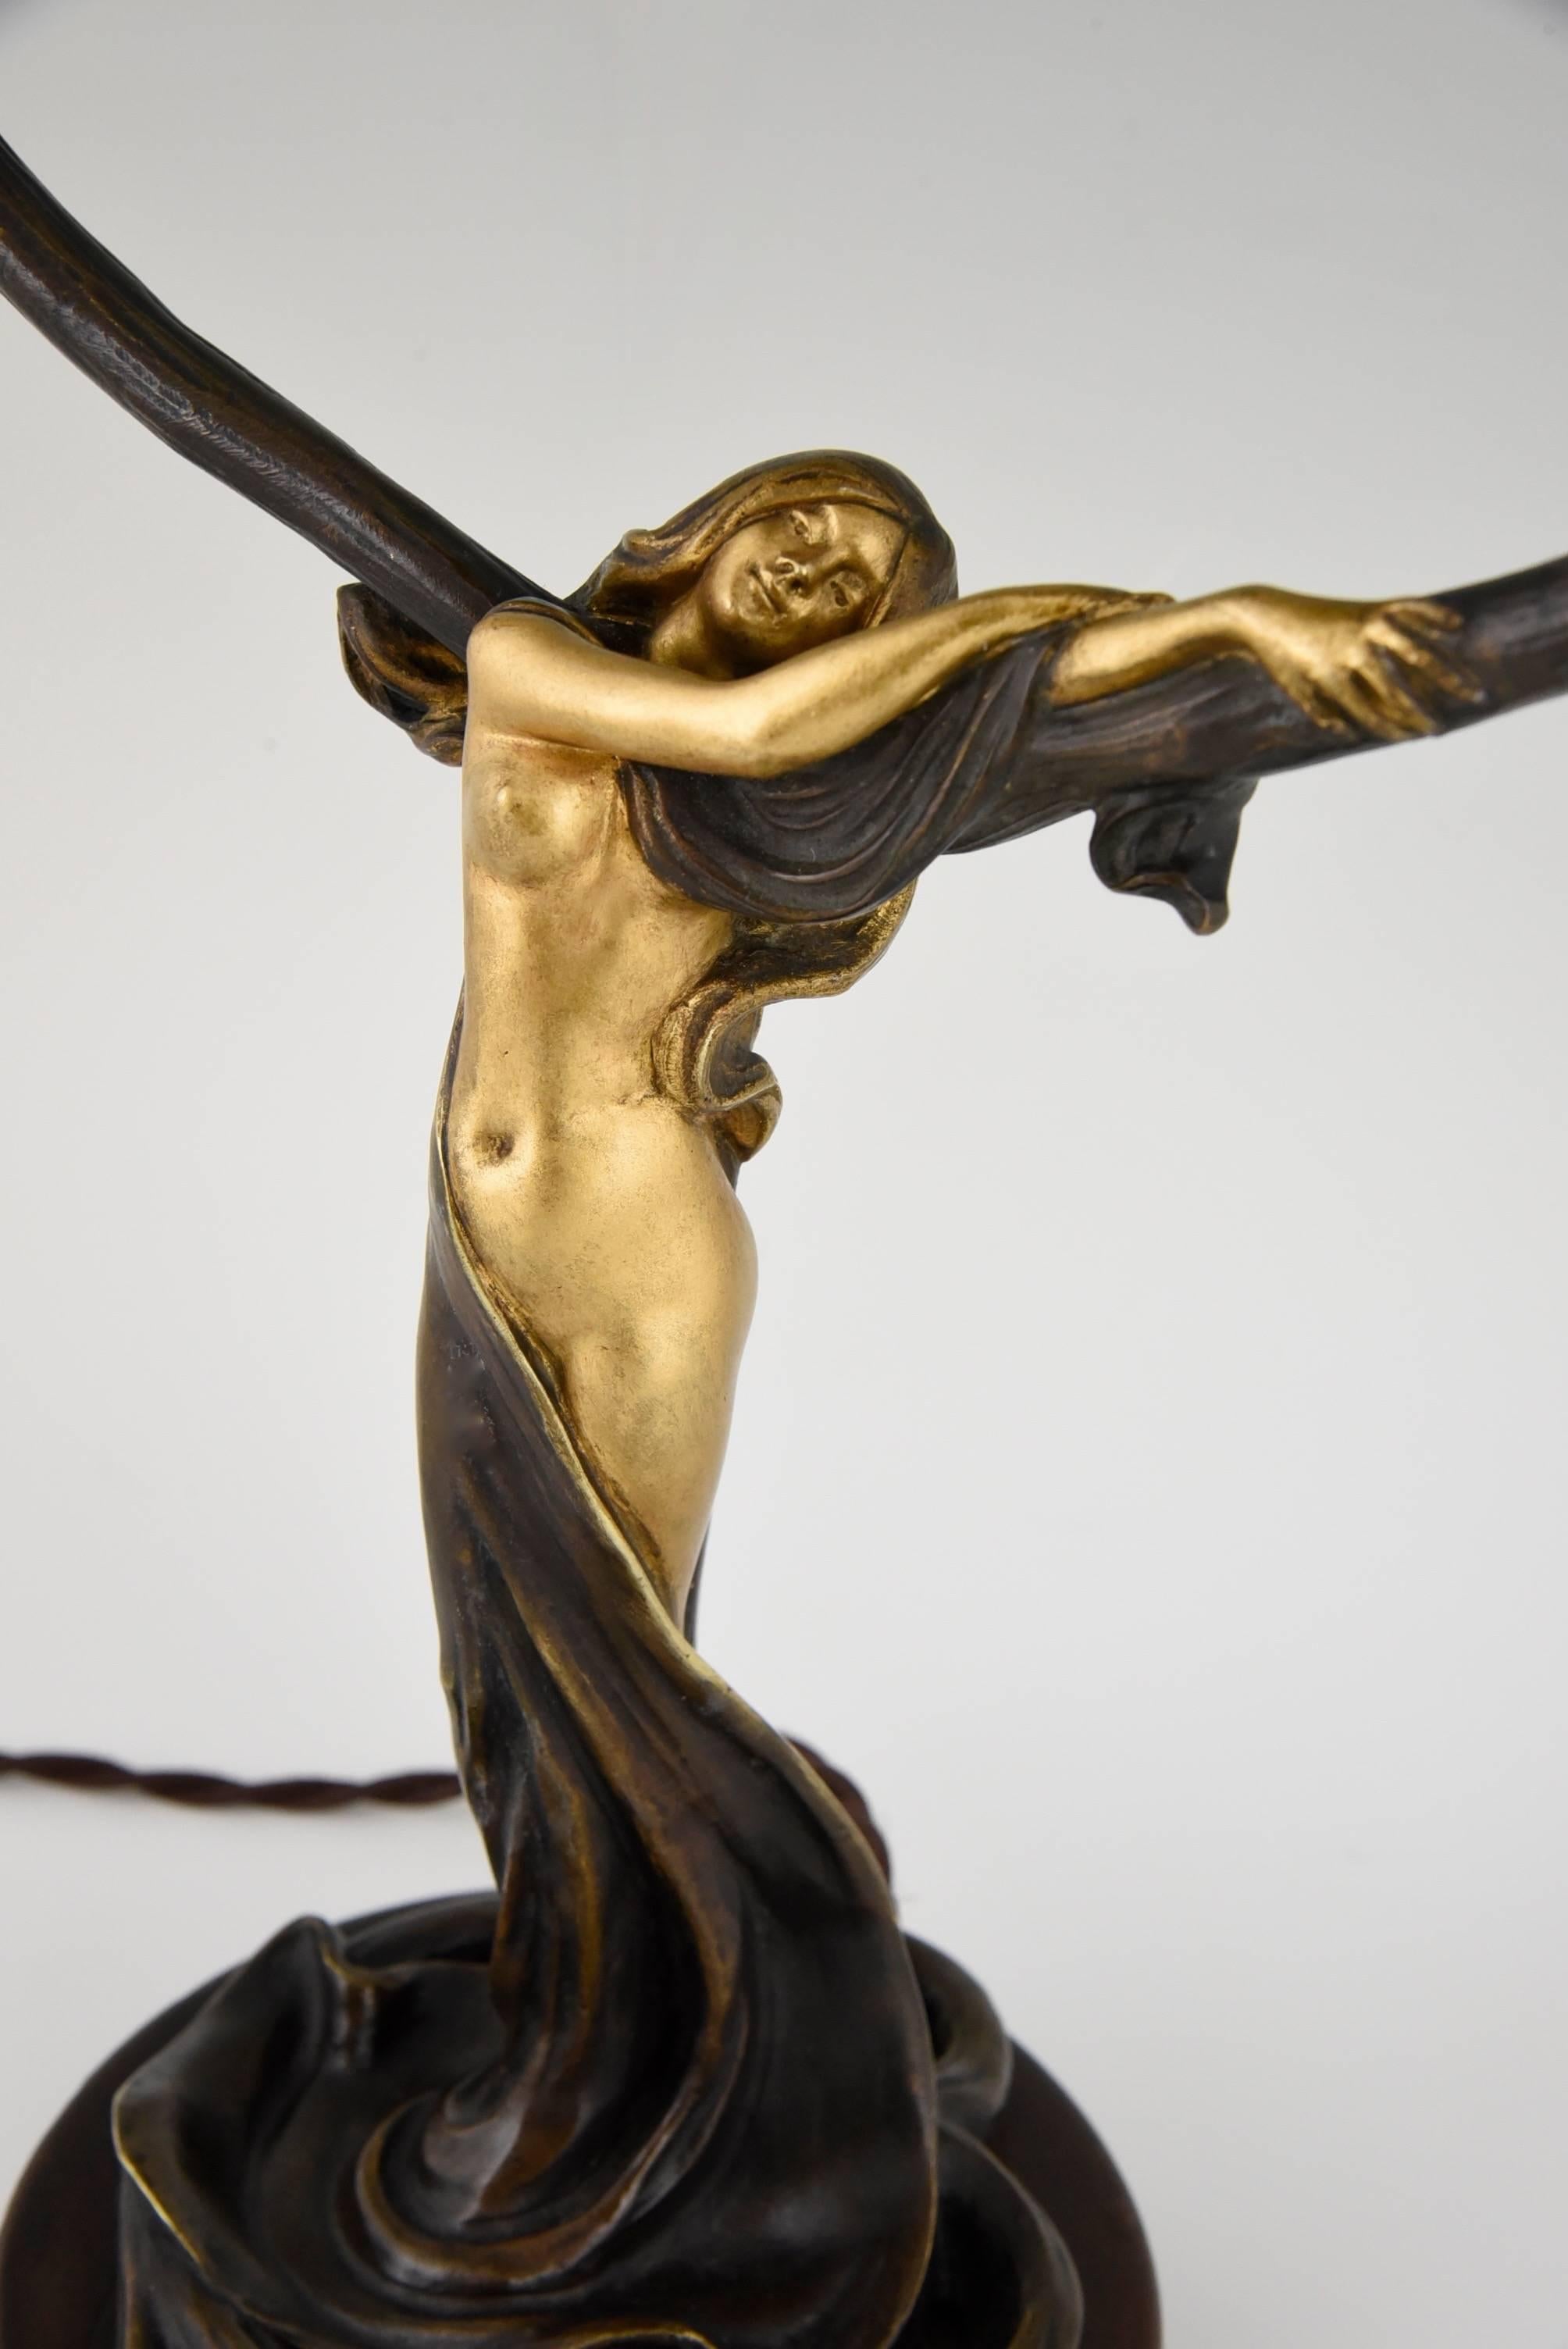 20th Century French Art Nouveau Bronze Table Lamp by Jonchery with Nude, 1900